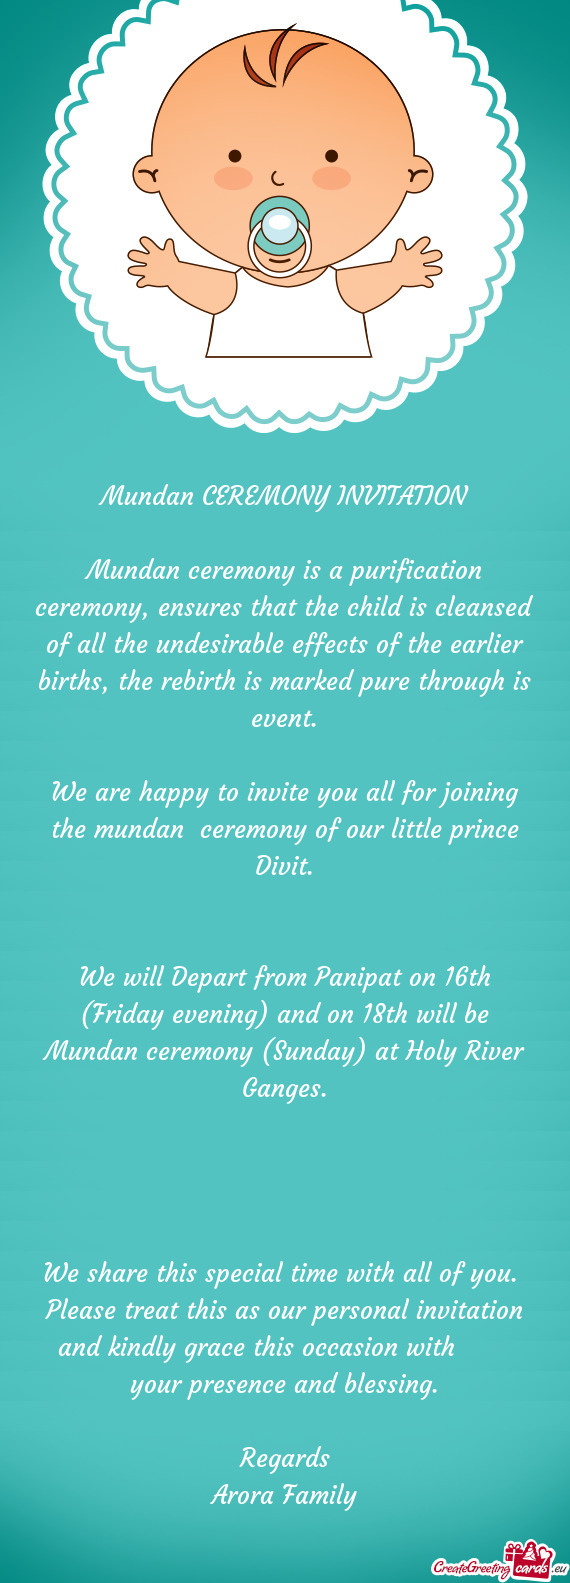 Mundan ceremony is a purification ceremony, ensures that the child is cleansed of all the undesirabl